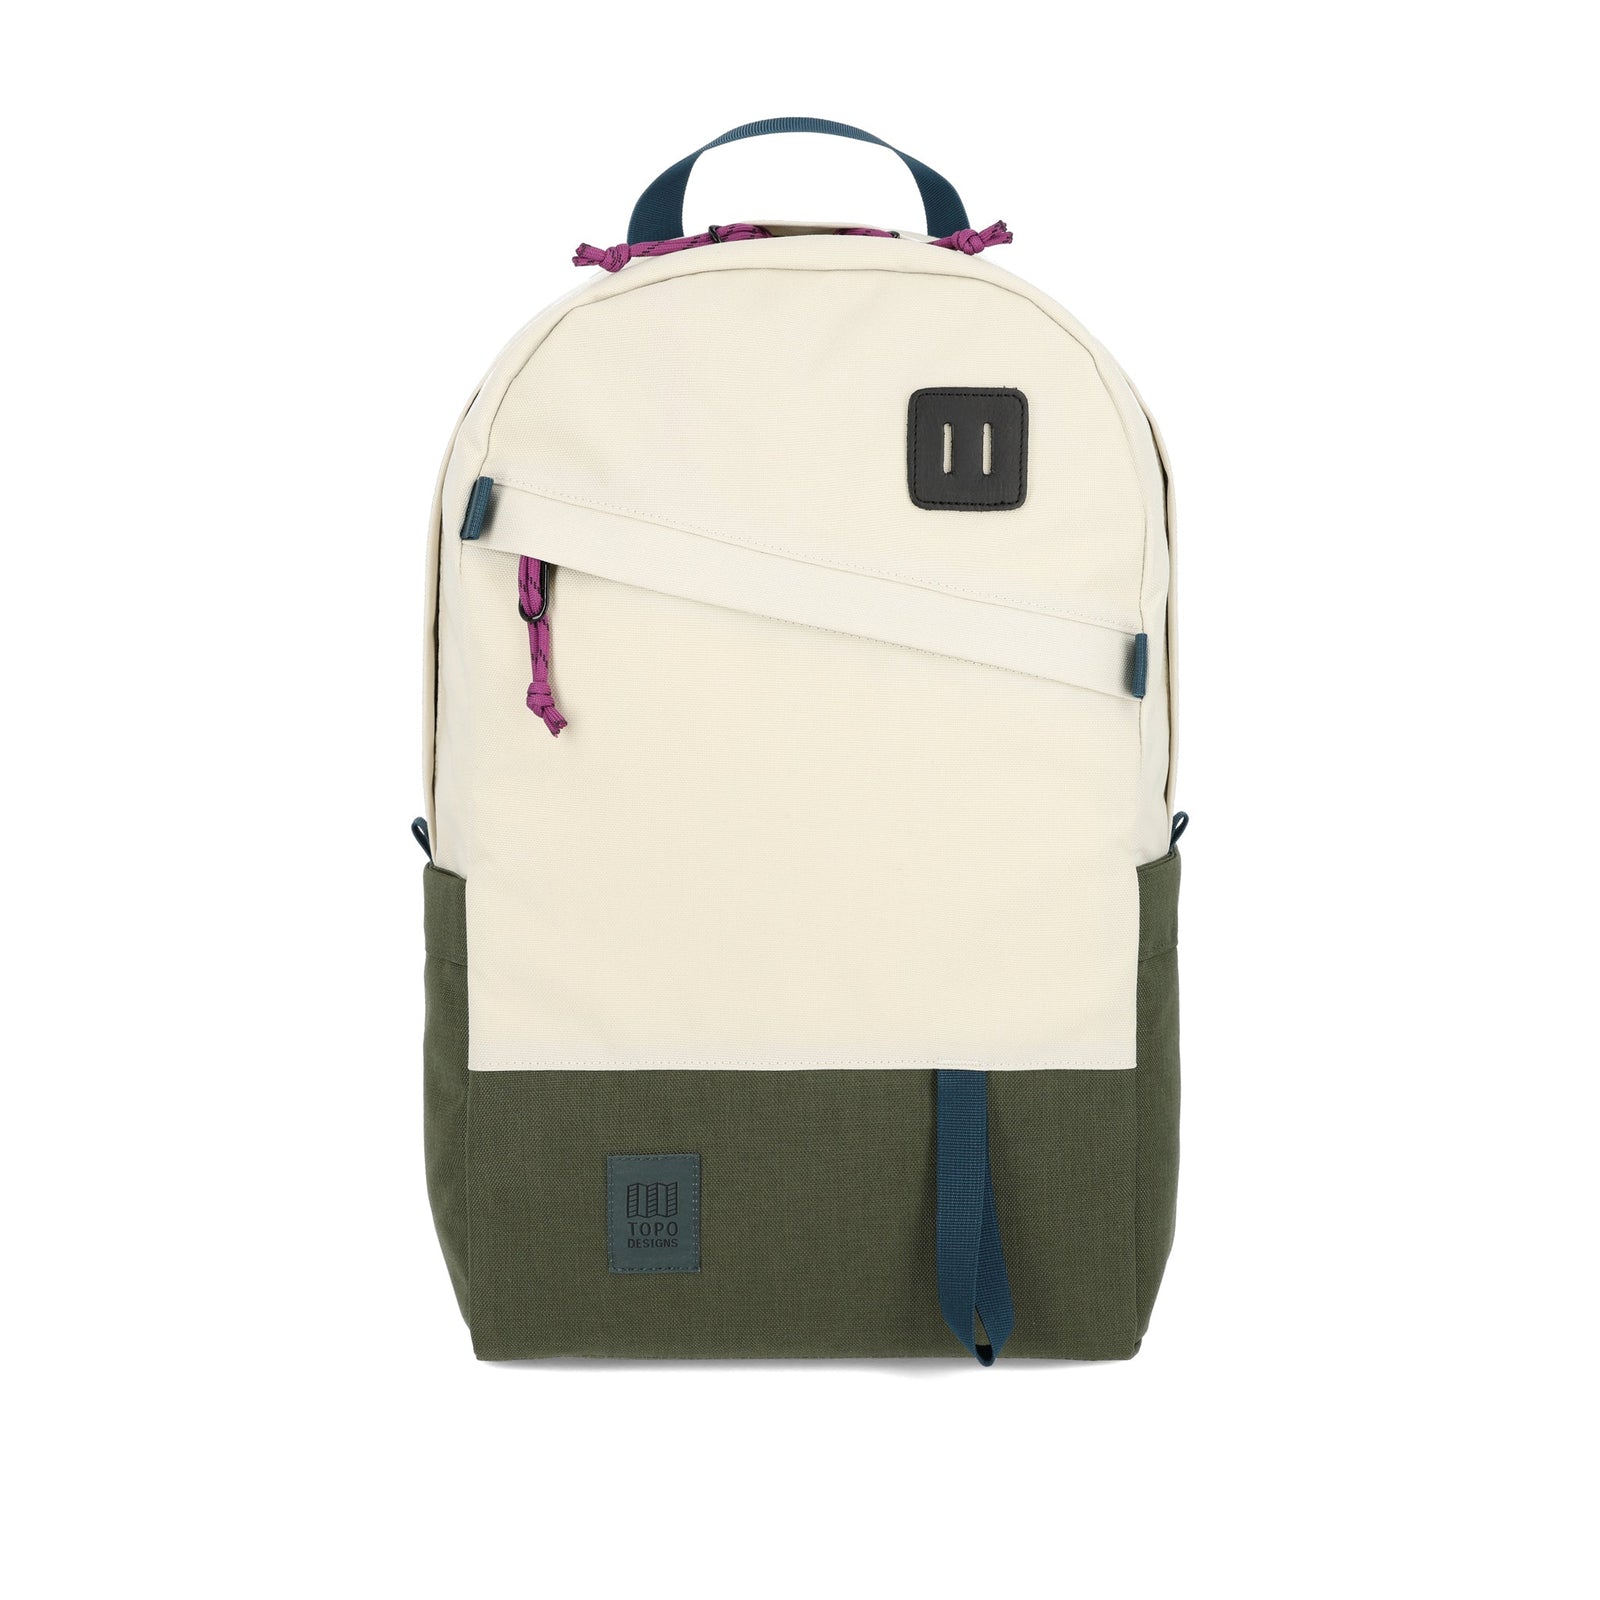 Topo Designs Daypack Classic 100% recycled nylon laptop backpack for work or school in "Bone White / Olive" green